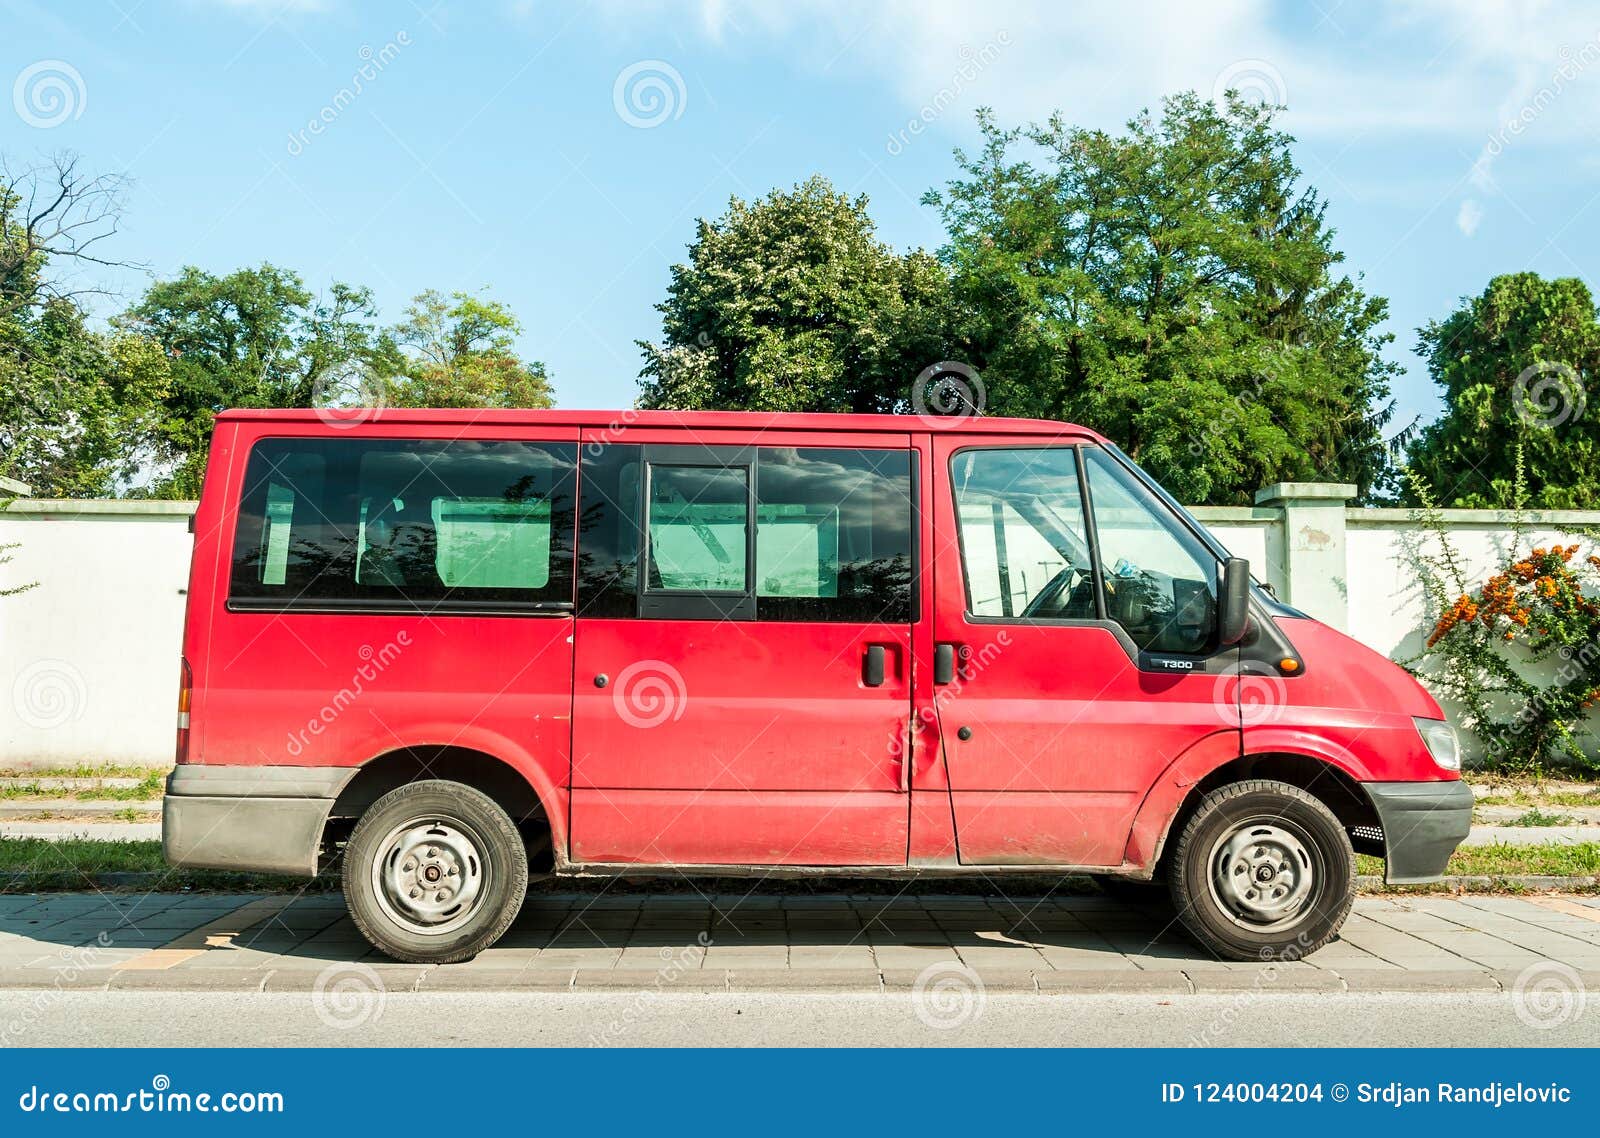 287 Ford Transit Van Photos - Free & Stock Photos from Dreamstime